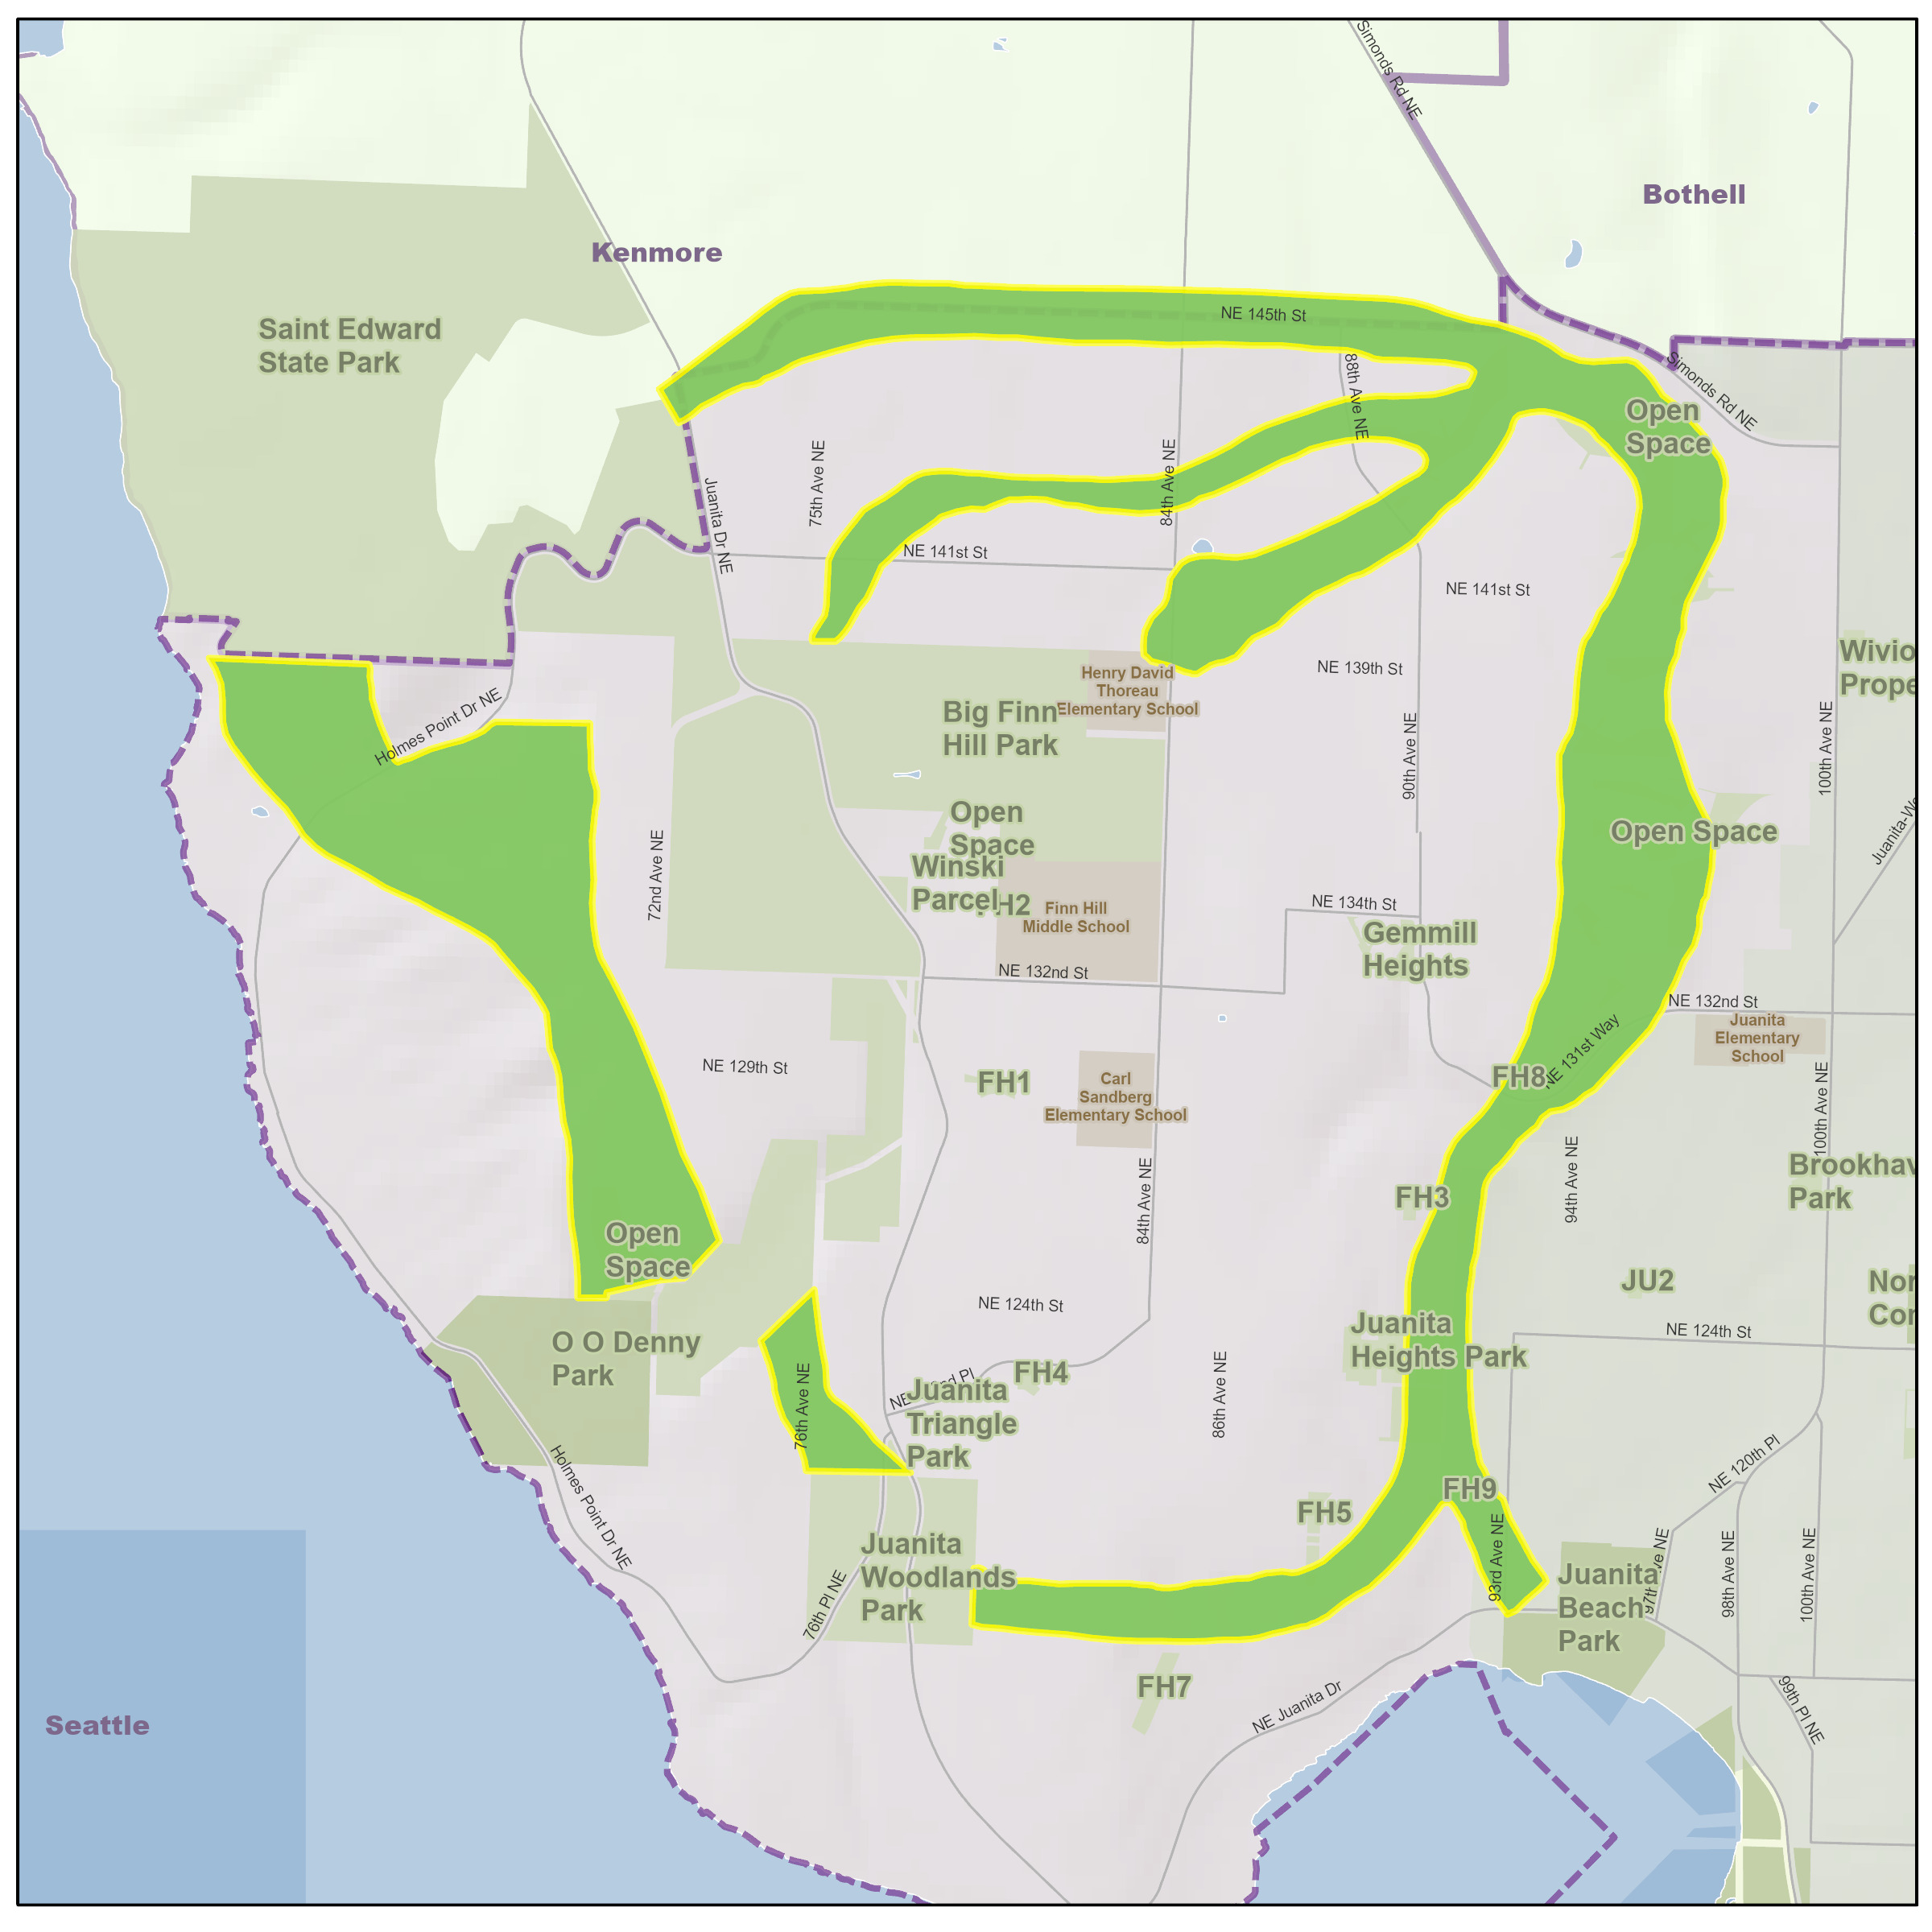 Proposed Green Loop Trail Network